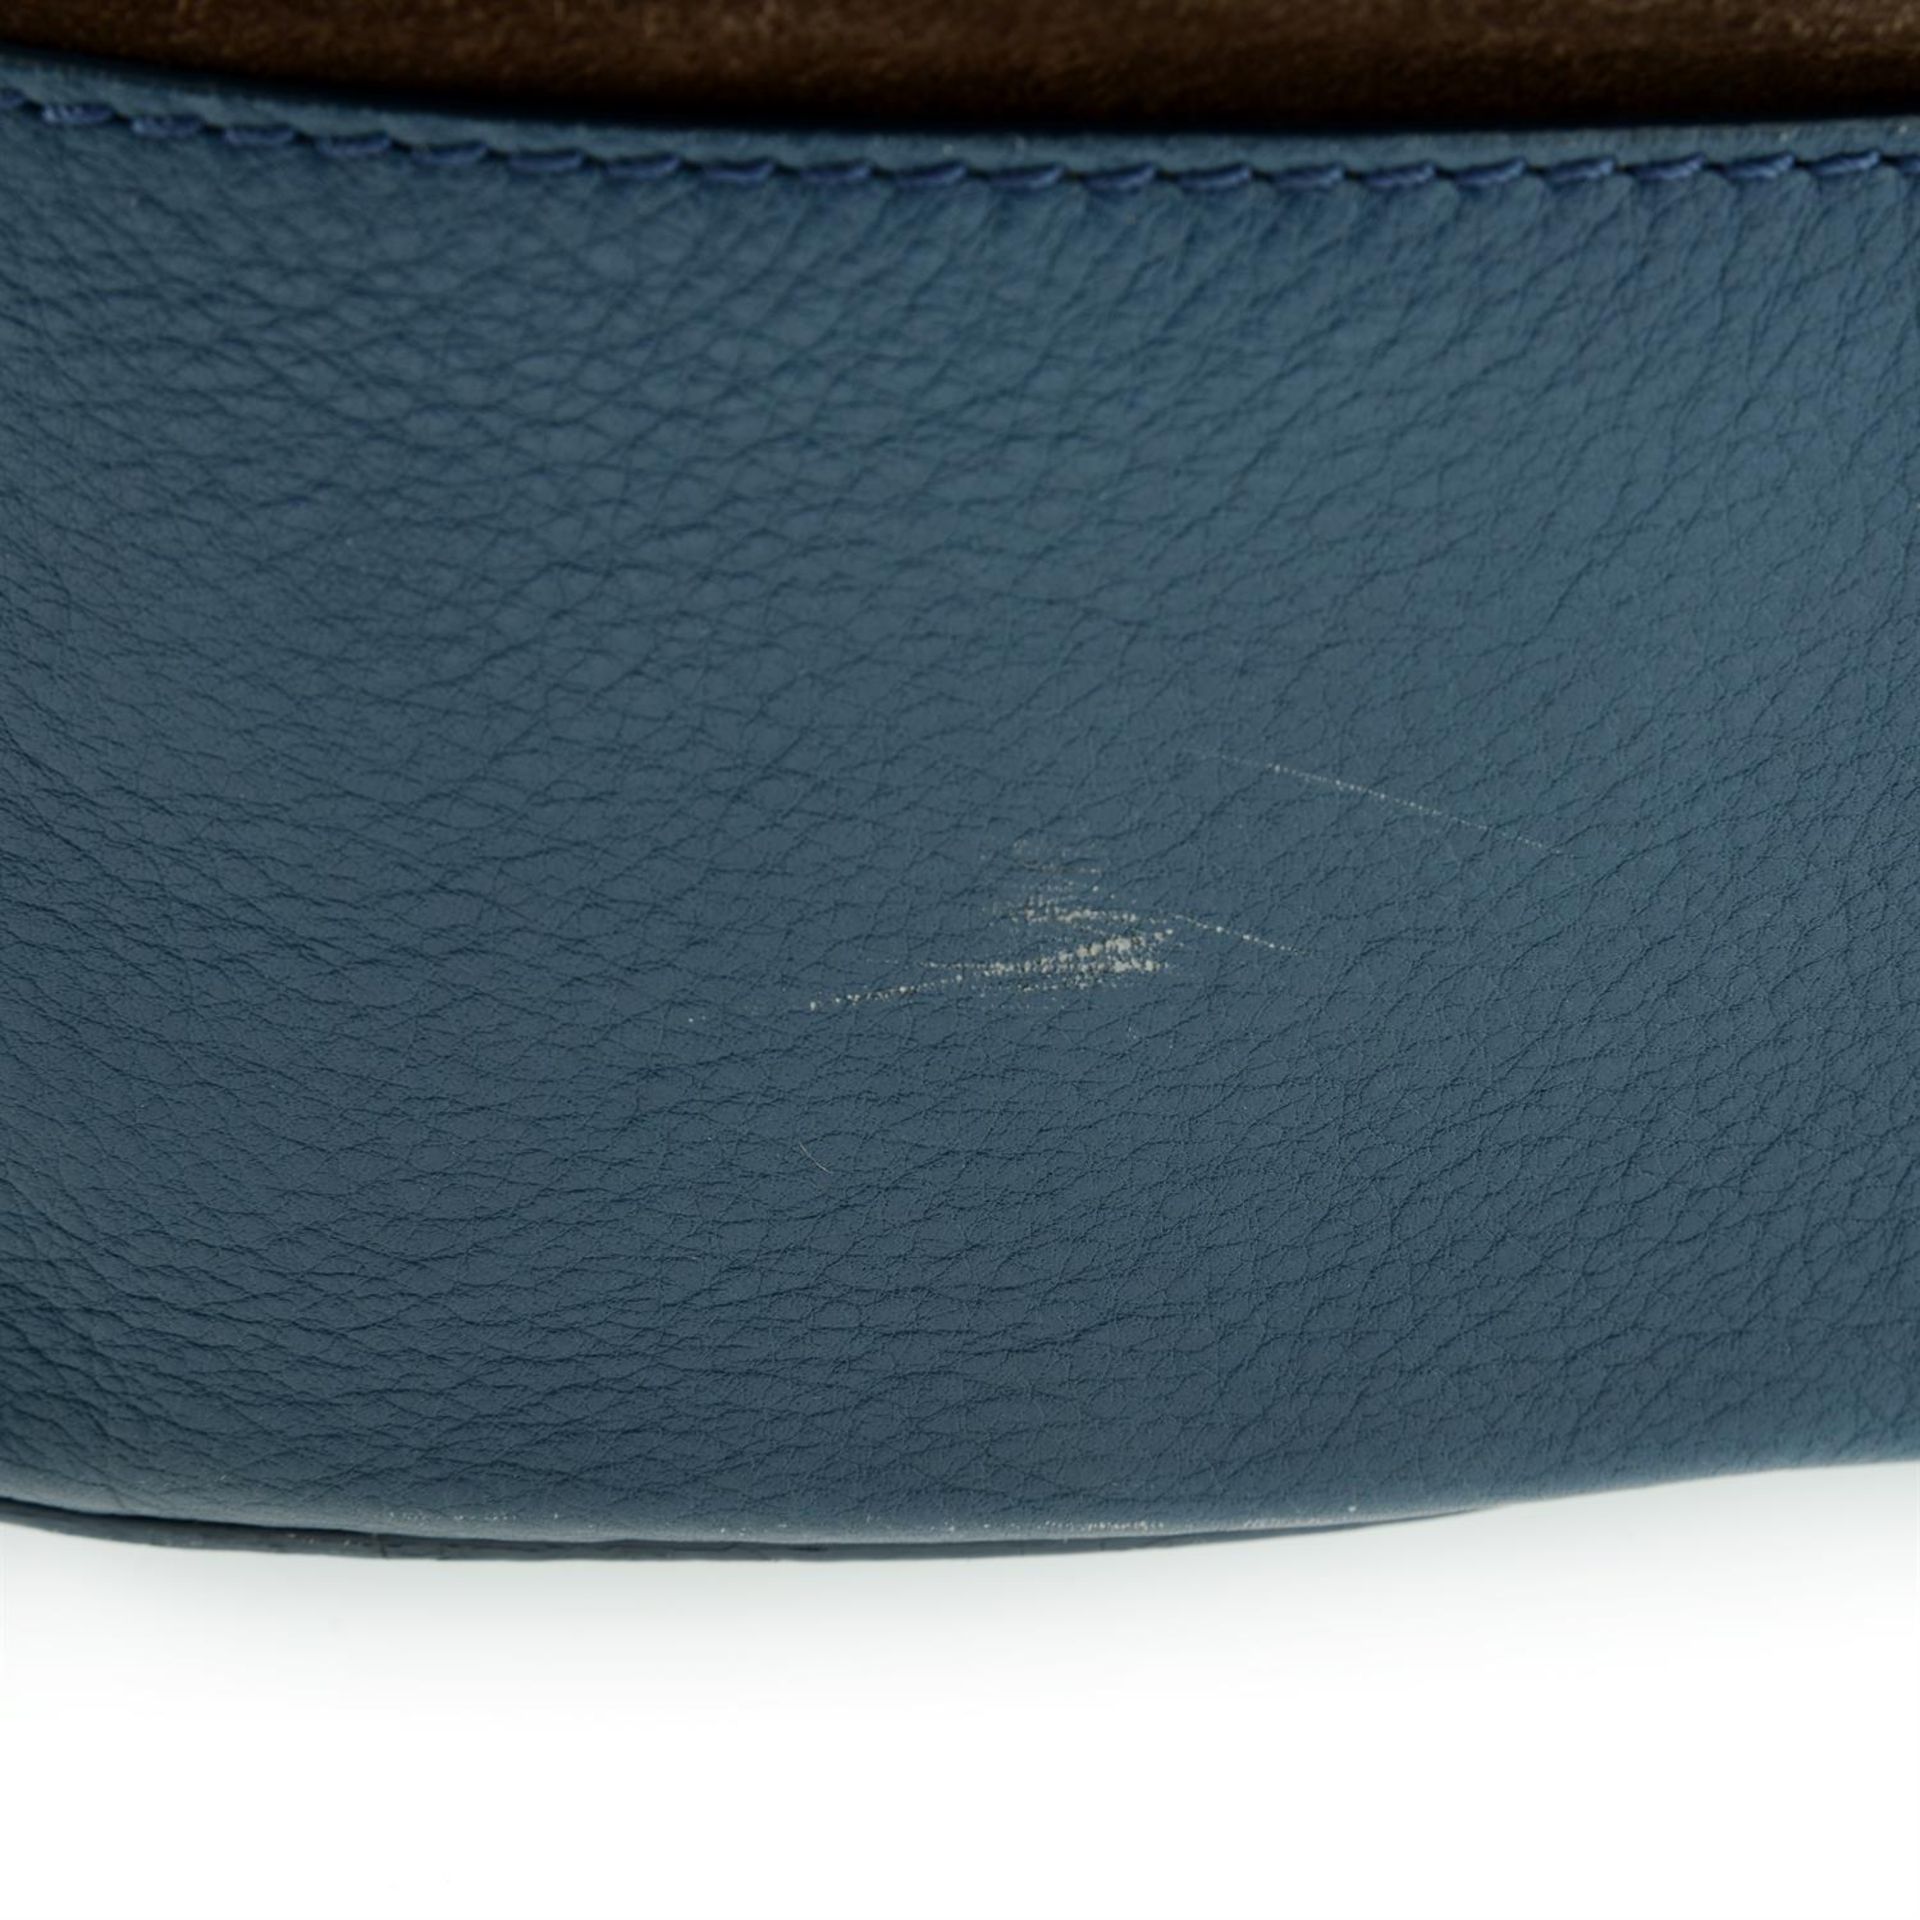 BALLY - a suede and leather bucket bag. - Image 5 of 5